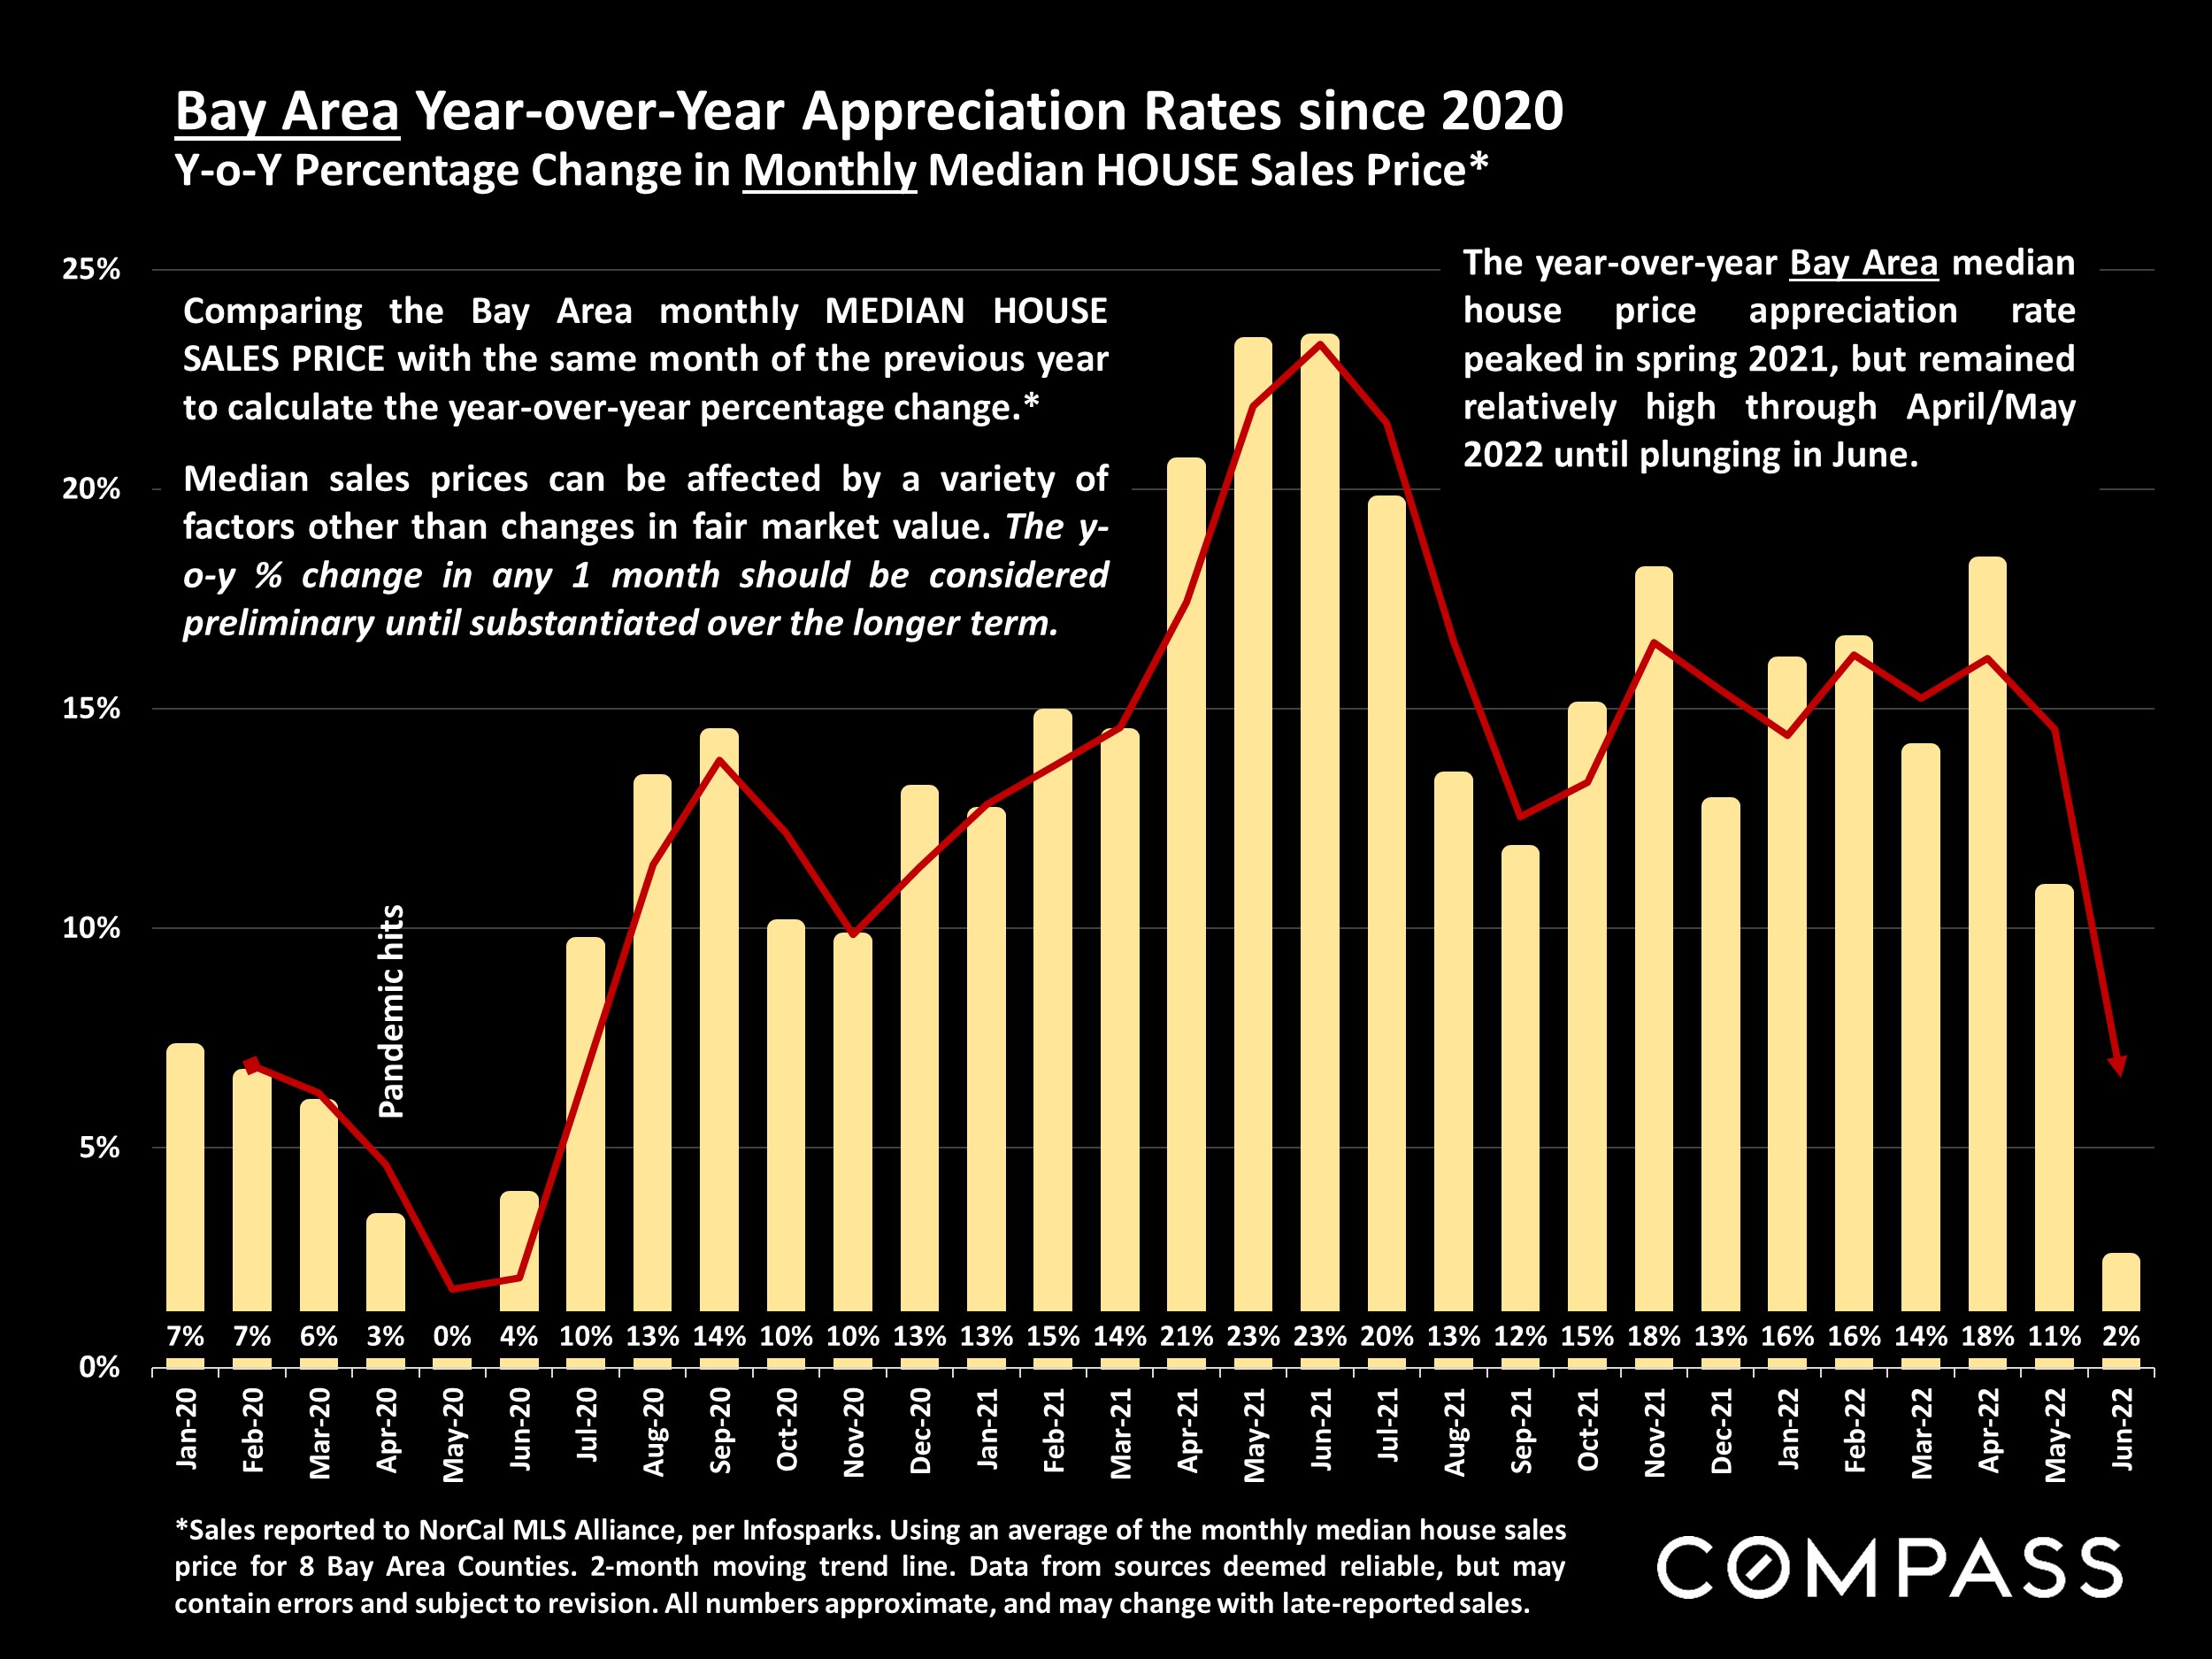 Slide showing Bay Area Year-over-Year Appreciation Rates since 2020